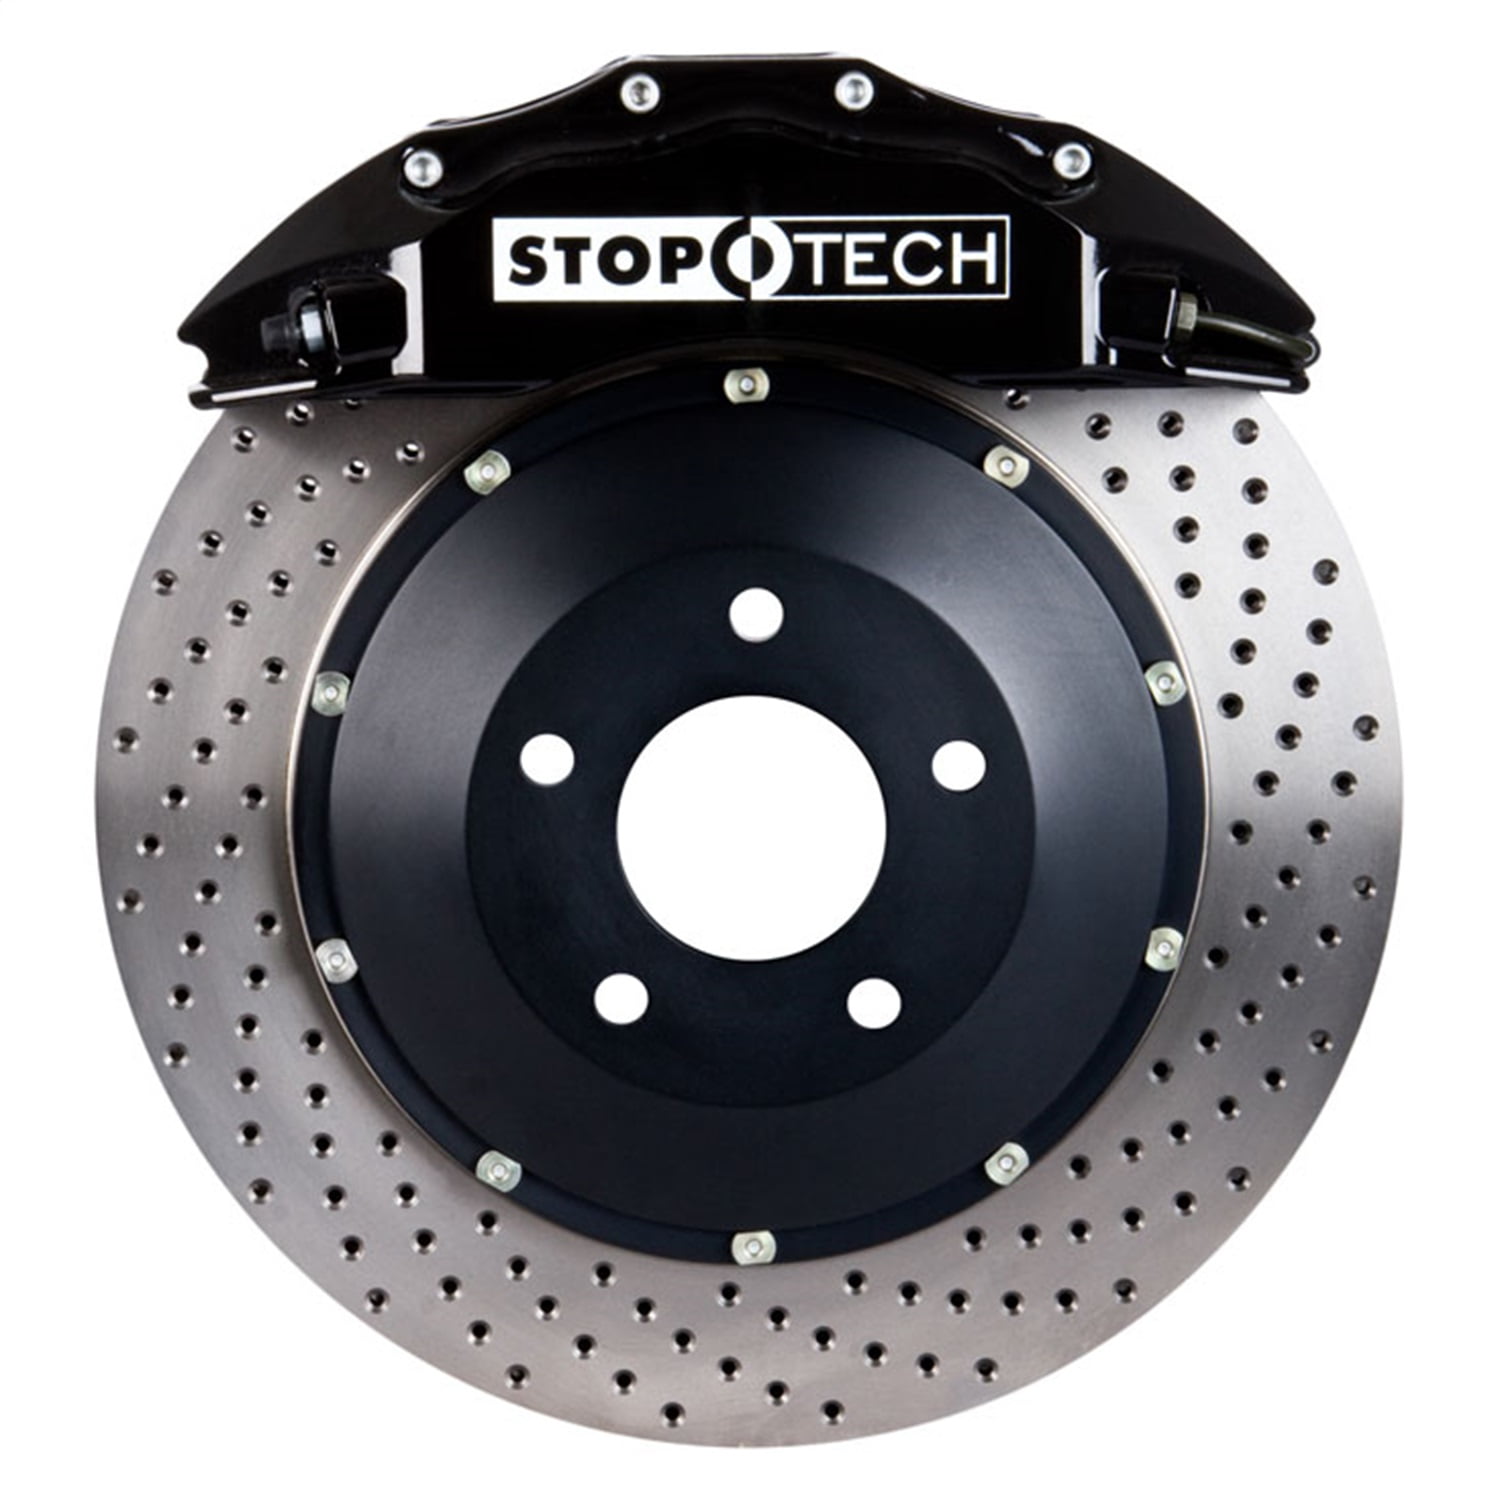 Jetta Eos Beetle StopTech Disc Brake Pad and Rotor Kit Front-Rear for A3